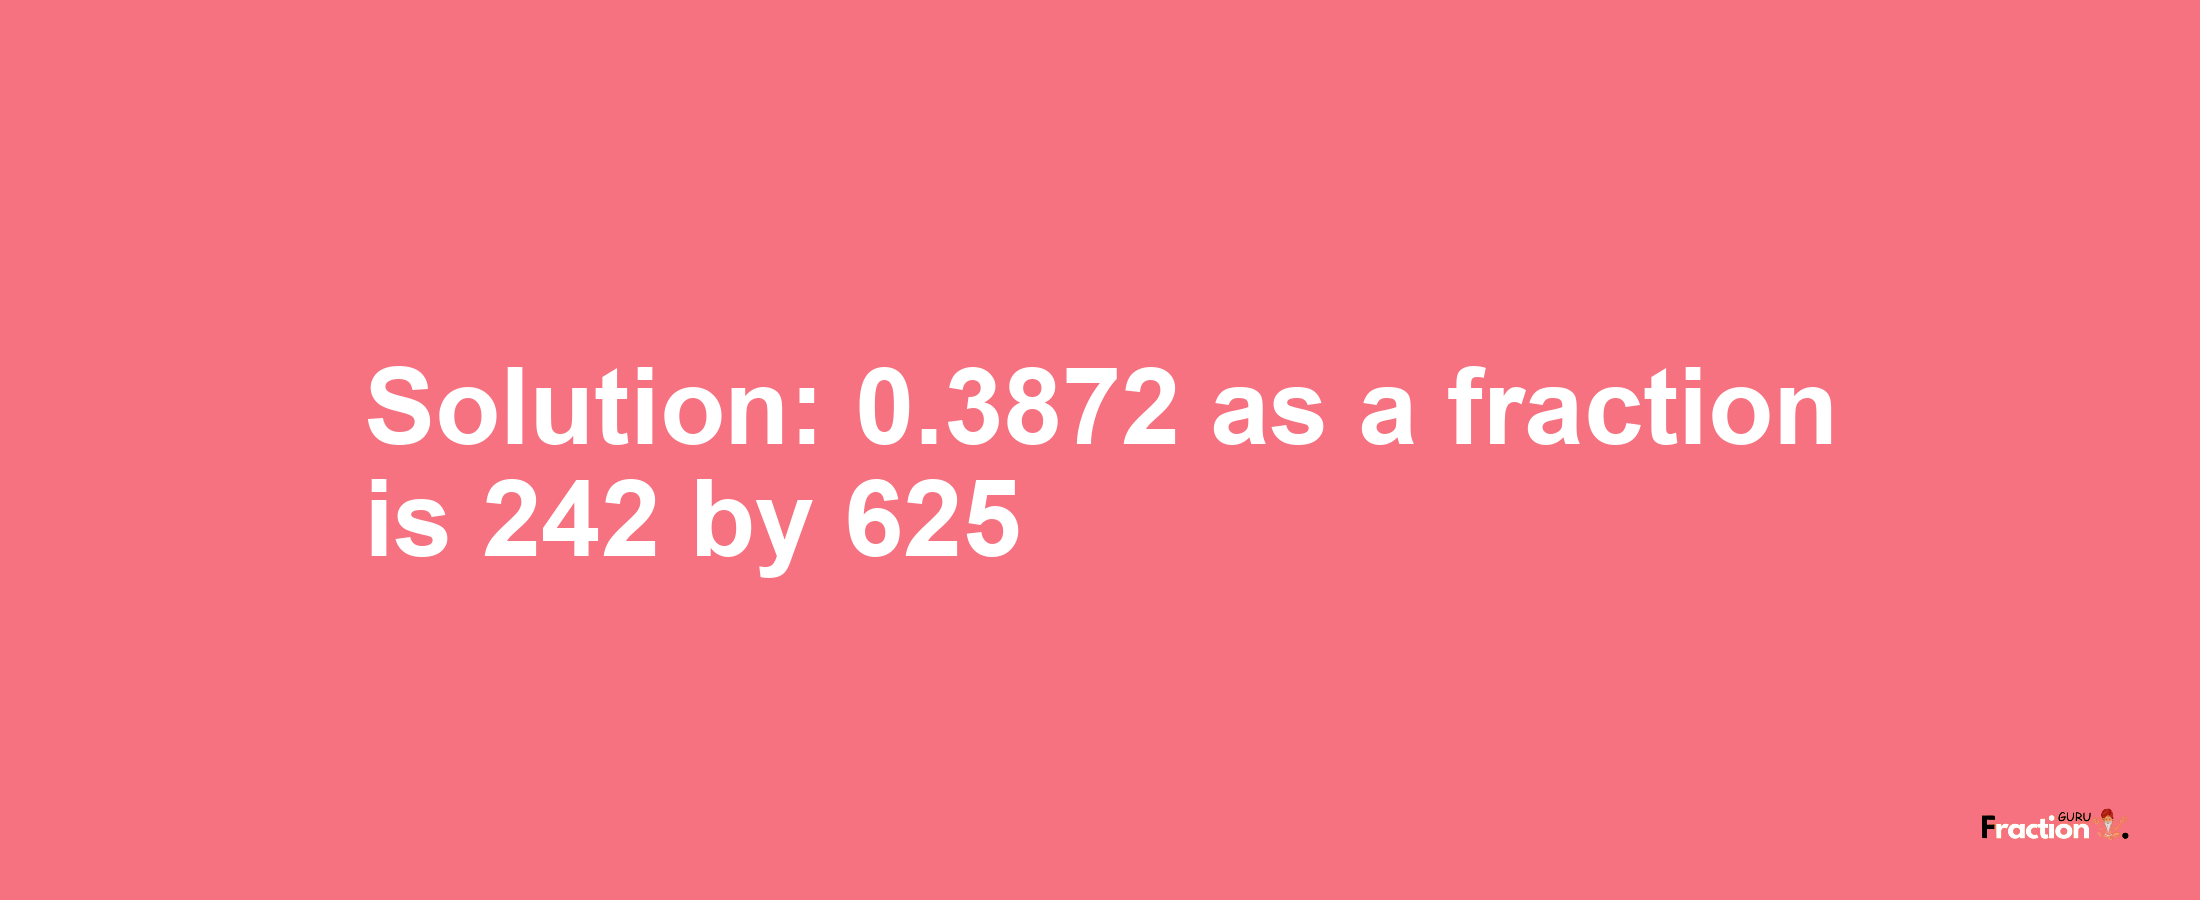 Solution:0.3872 as a fraction is 242/625